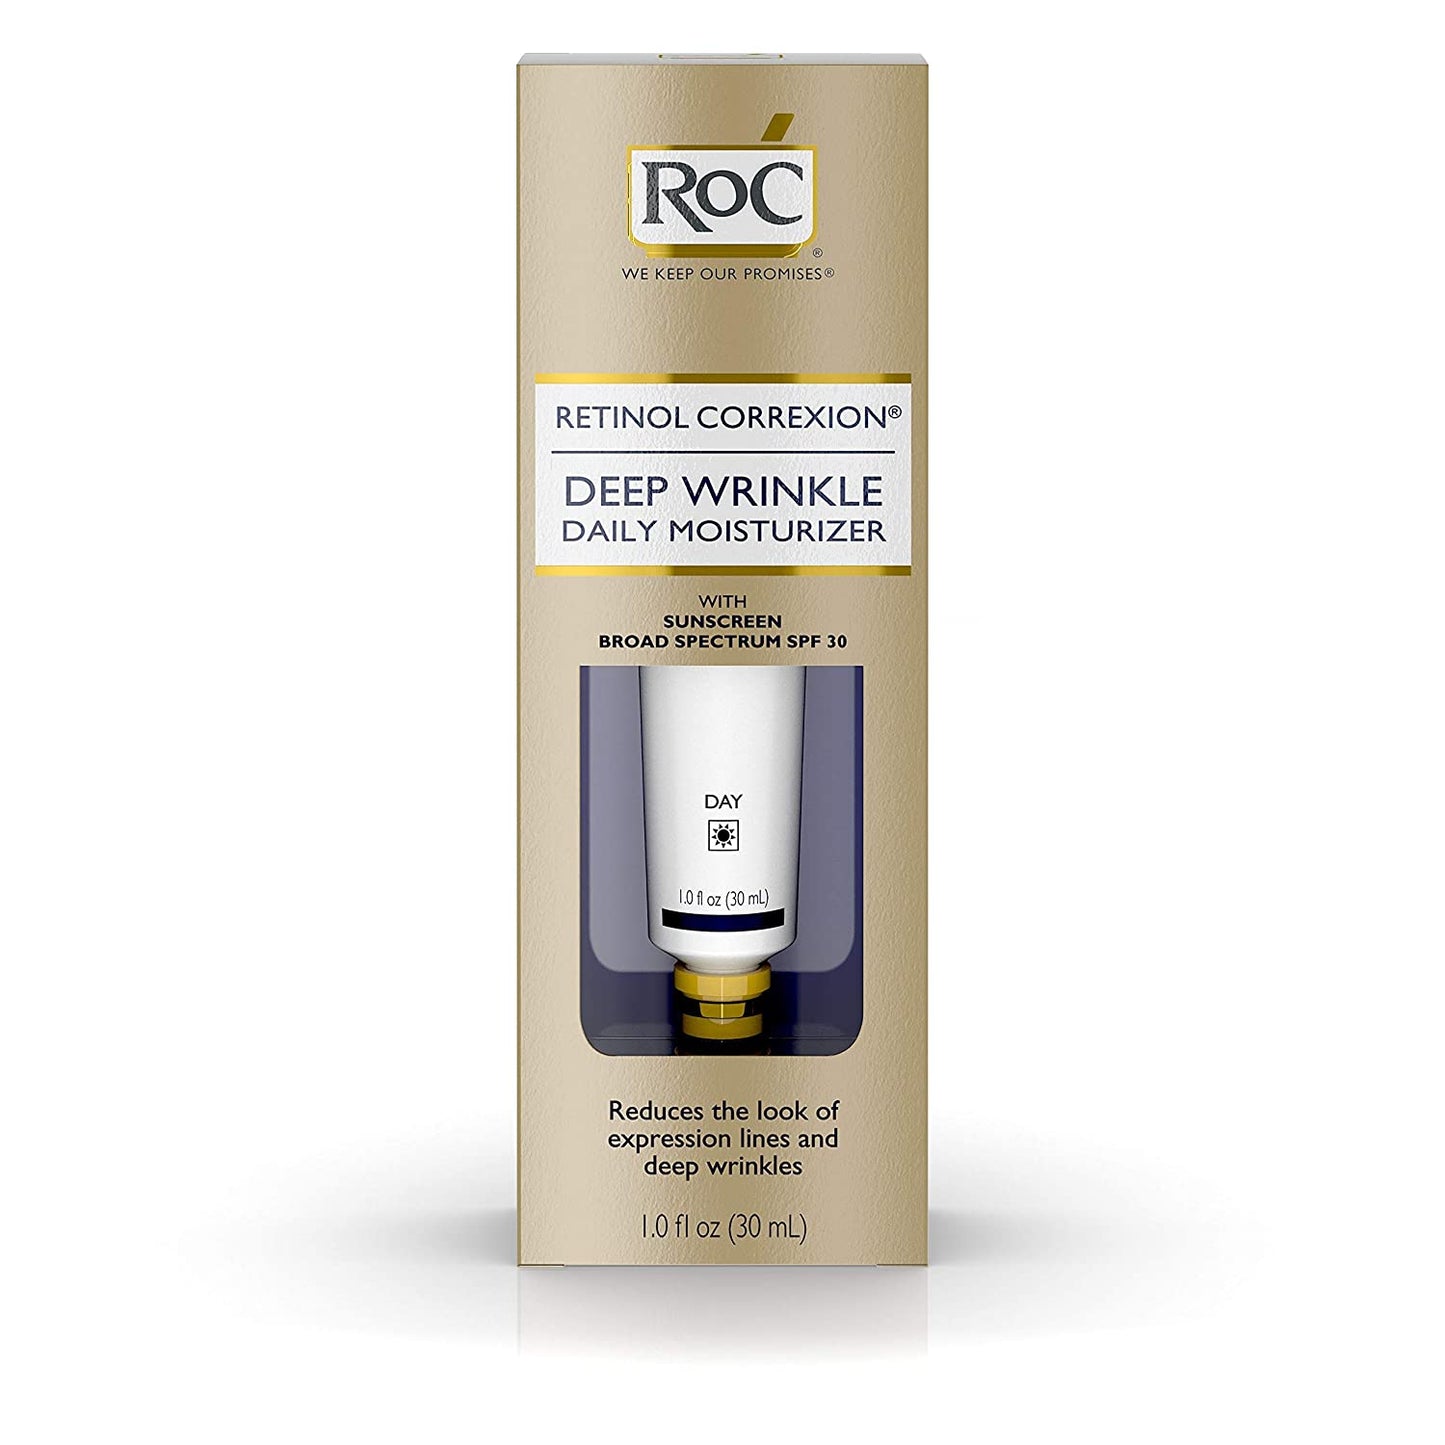 RoC Retinol Correxion Deep Wrinkle Daily Moisturizer with Sunscreen Broad Spectrum SPF 30, 1.0 fl.oz / 30ml (PACKAGING MAY VARY)